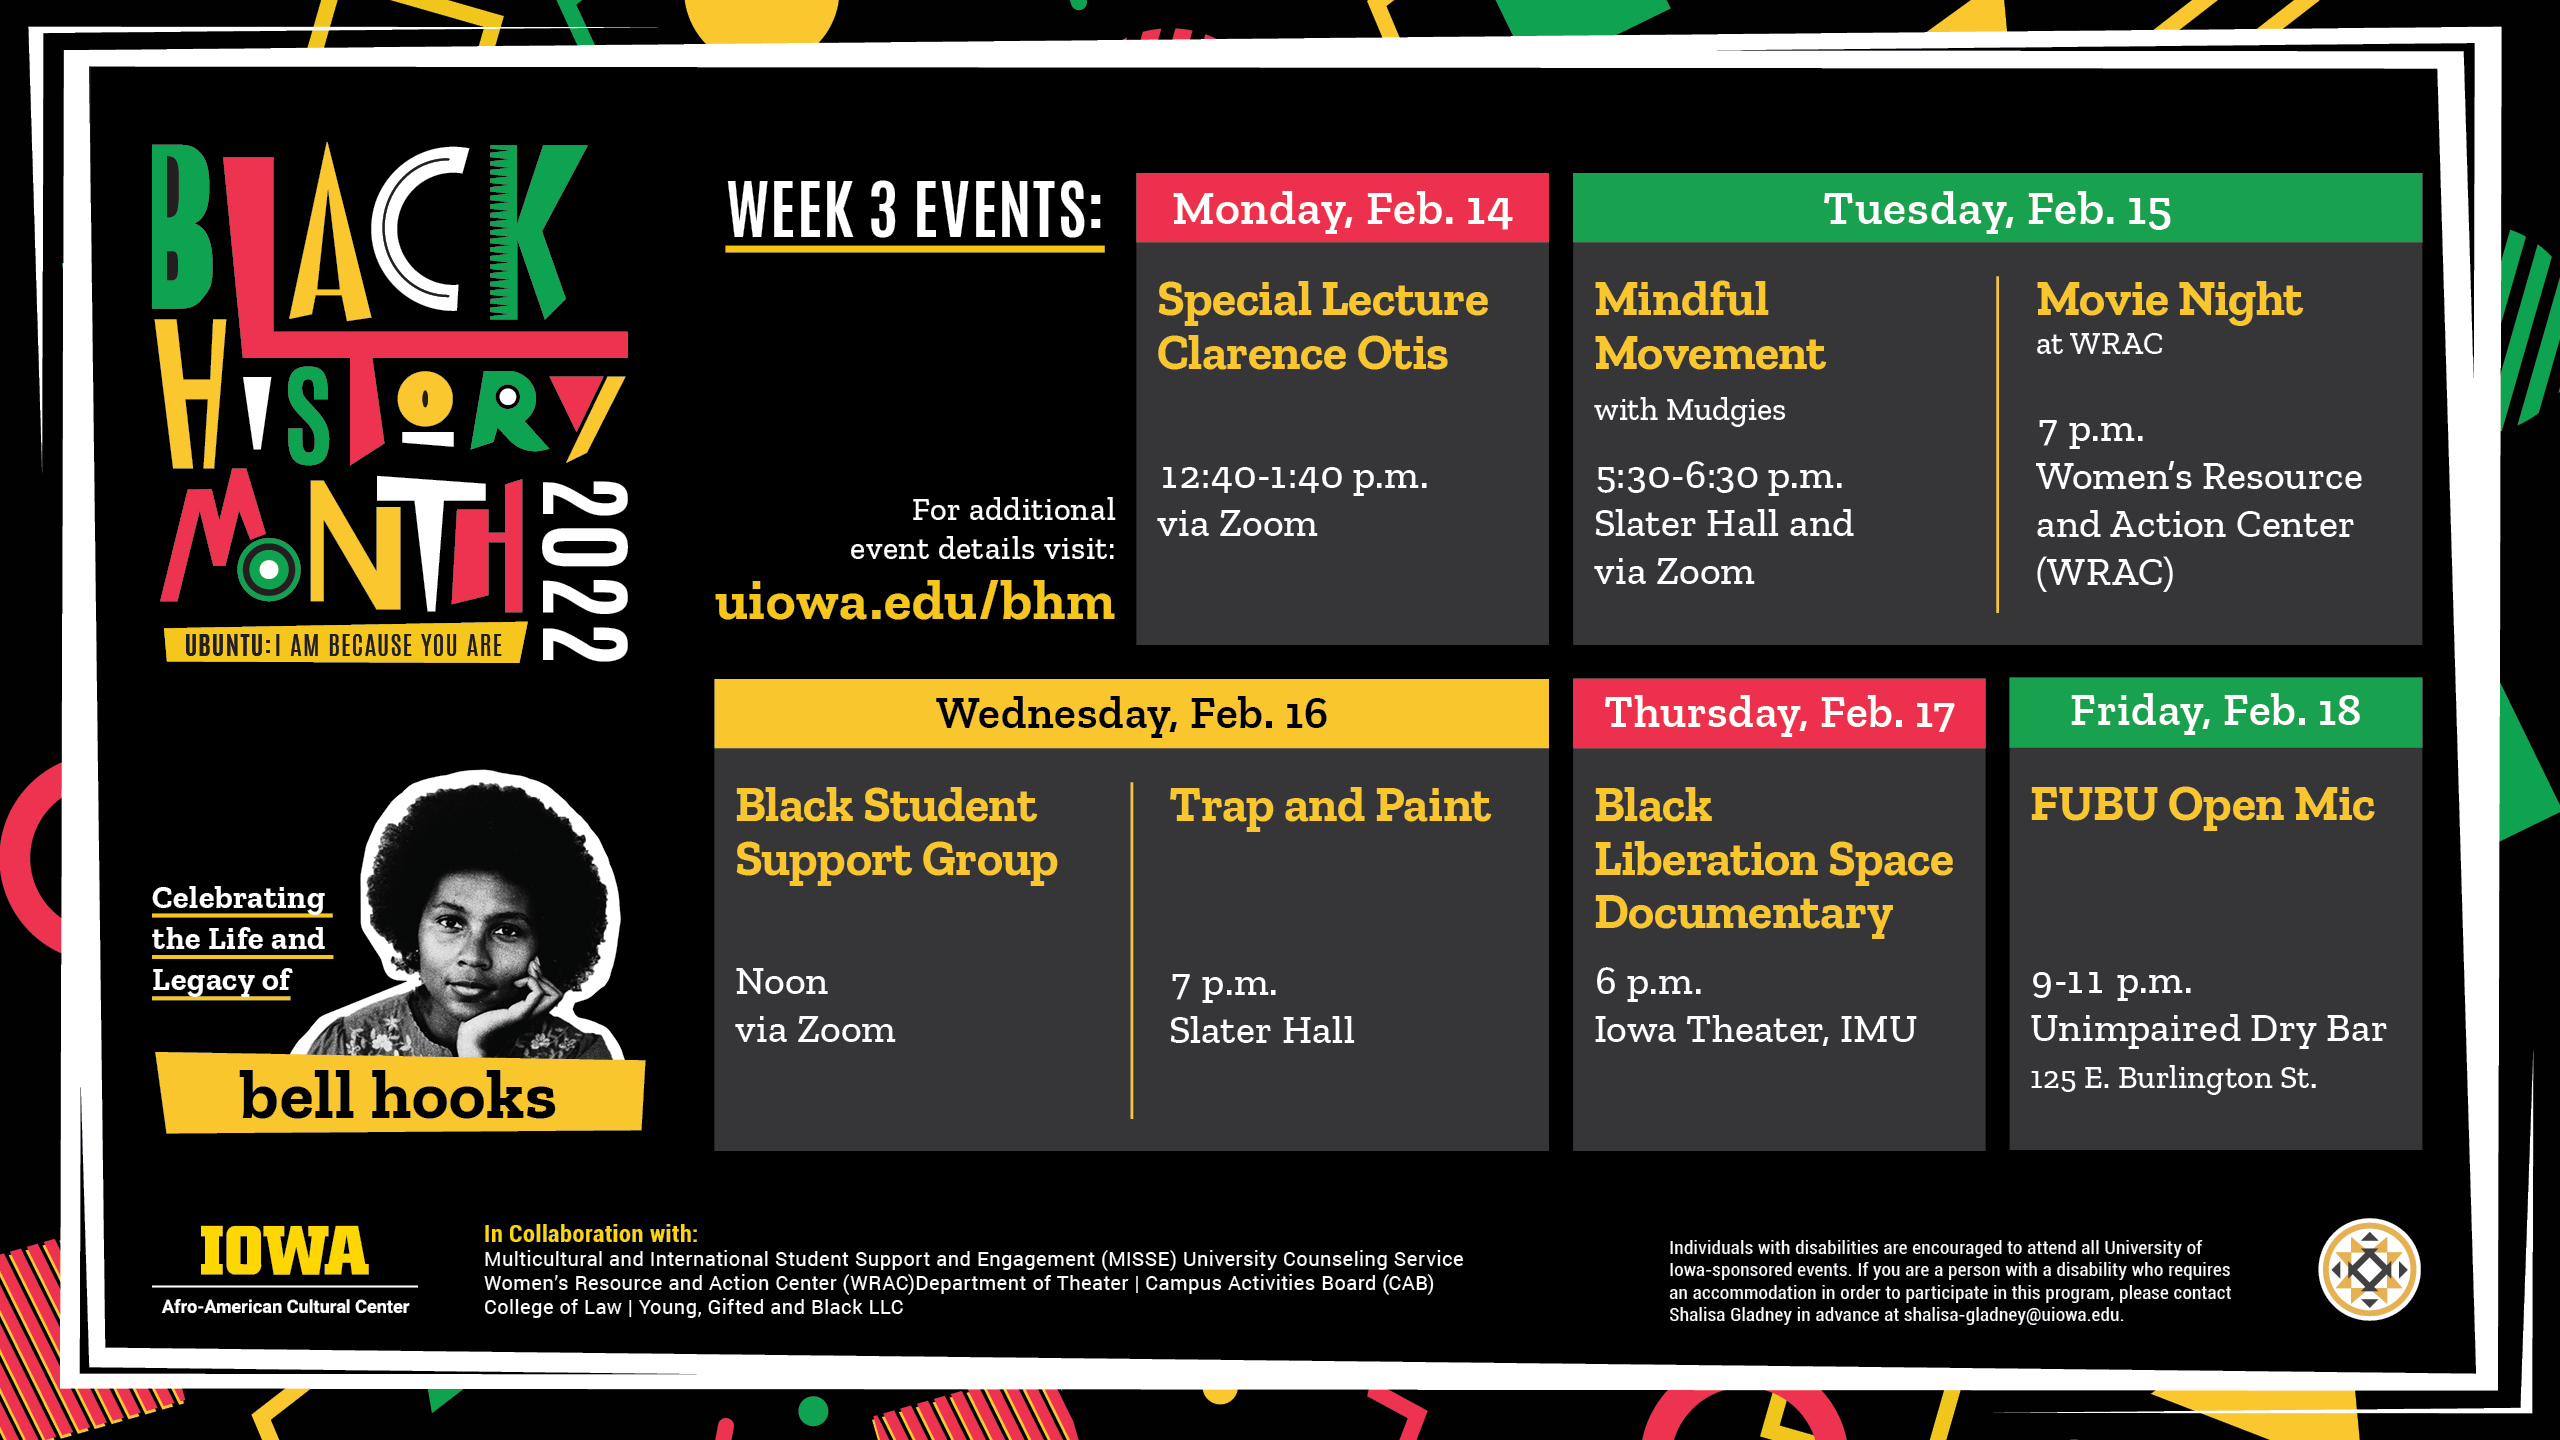 Black History Month 2022 Week 3 Events: Monday, Feb. 14 Special Lecture Clarence Otis 12:40 - 1:40 p.m. via Zoom. Tuesdays, Feb. 15 Mindful Movement with Mudgies 5:30 - 6:30 p.m. Slater Hall and Zoom; Movie Night at WRAC 7 p.m. Women's Resource and Action Center (WRAC). Wednesday, Feb. 16 Black Student Support Group Noon via Zoom Trap and Paint 7 p.m. Slater Hall. Thursday, Feb. 17 Black Liberation Space Documentary 6 p.m. Iowa Theatre, IMU. Friday, Feb. 18 FUBU Open Mic 9 - 11 p.m. Unimpaired Dry Bar 125 E. Burlington St. For additional event details visit: uiowa.edu/bhm